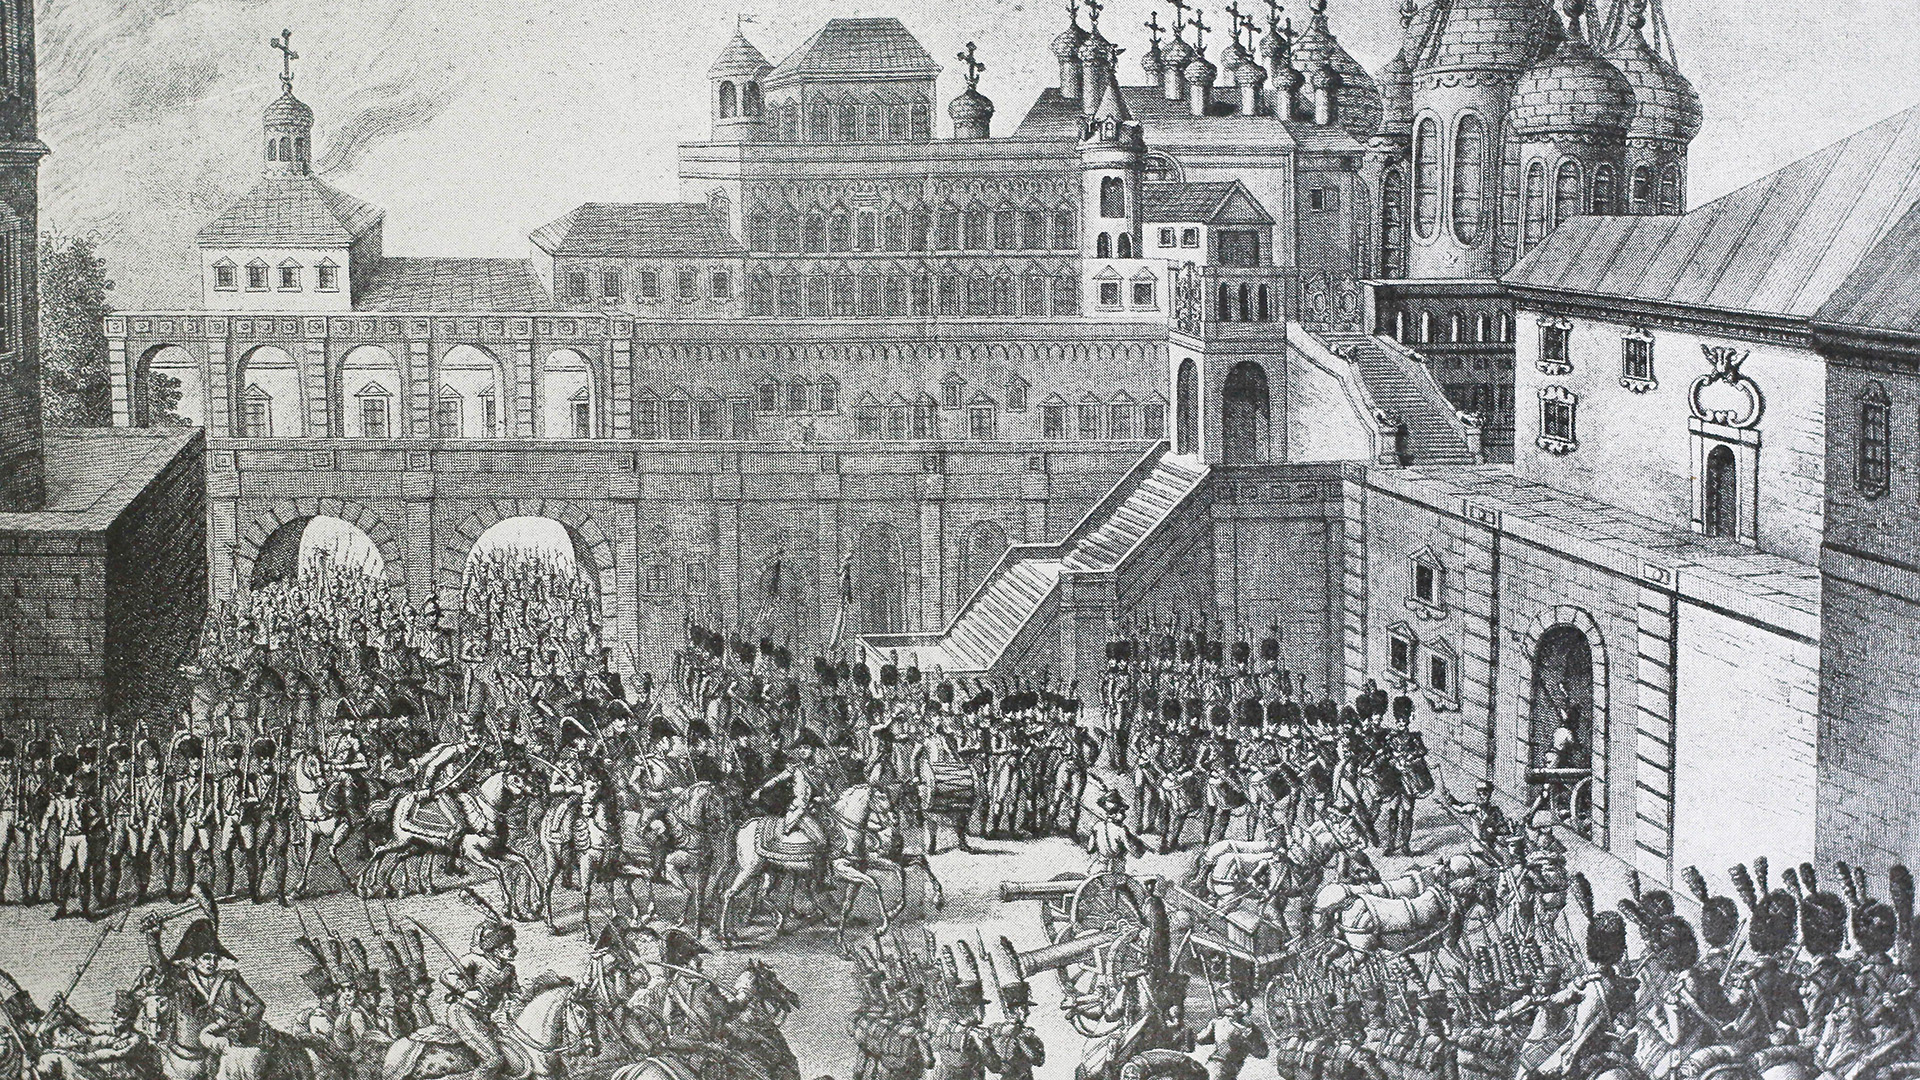 A 19th century engraving of the entry of French Emperor Napoleon Bonaparte’s Grande Armée into Moscow in 1812